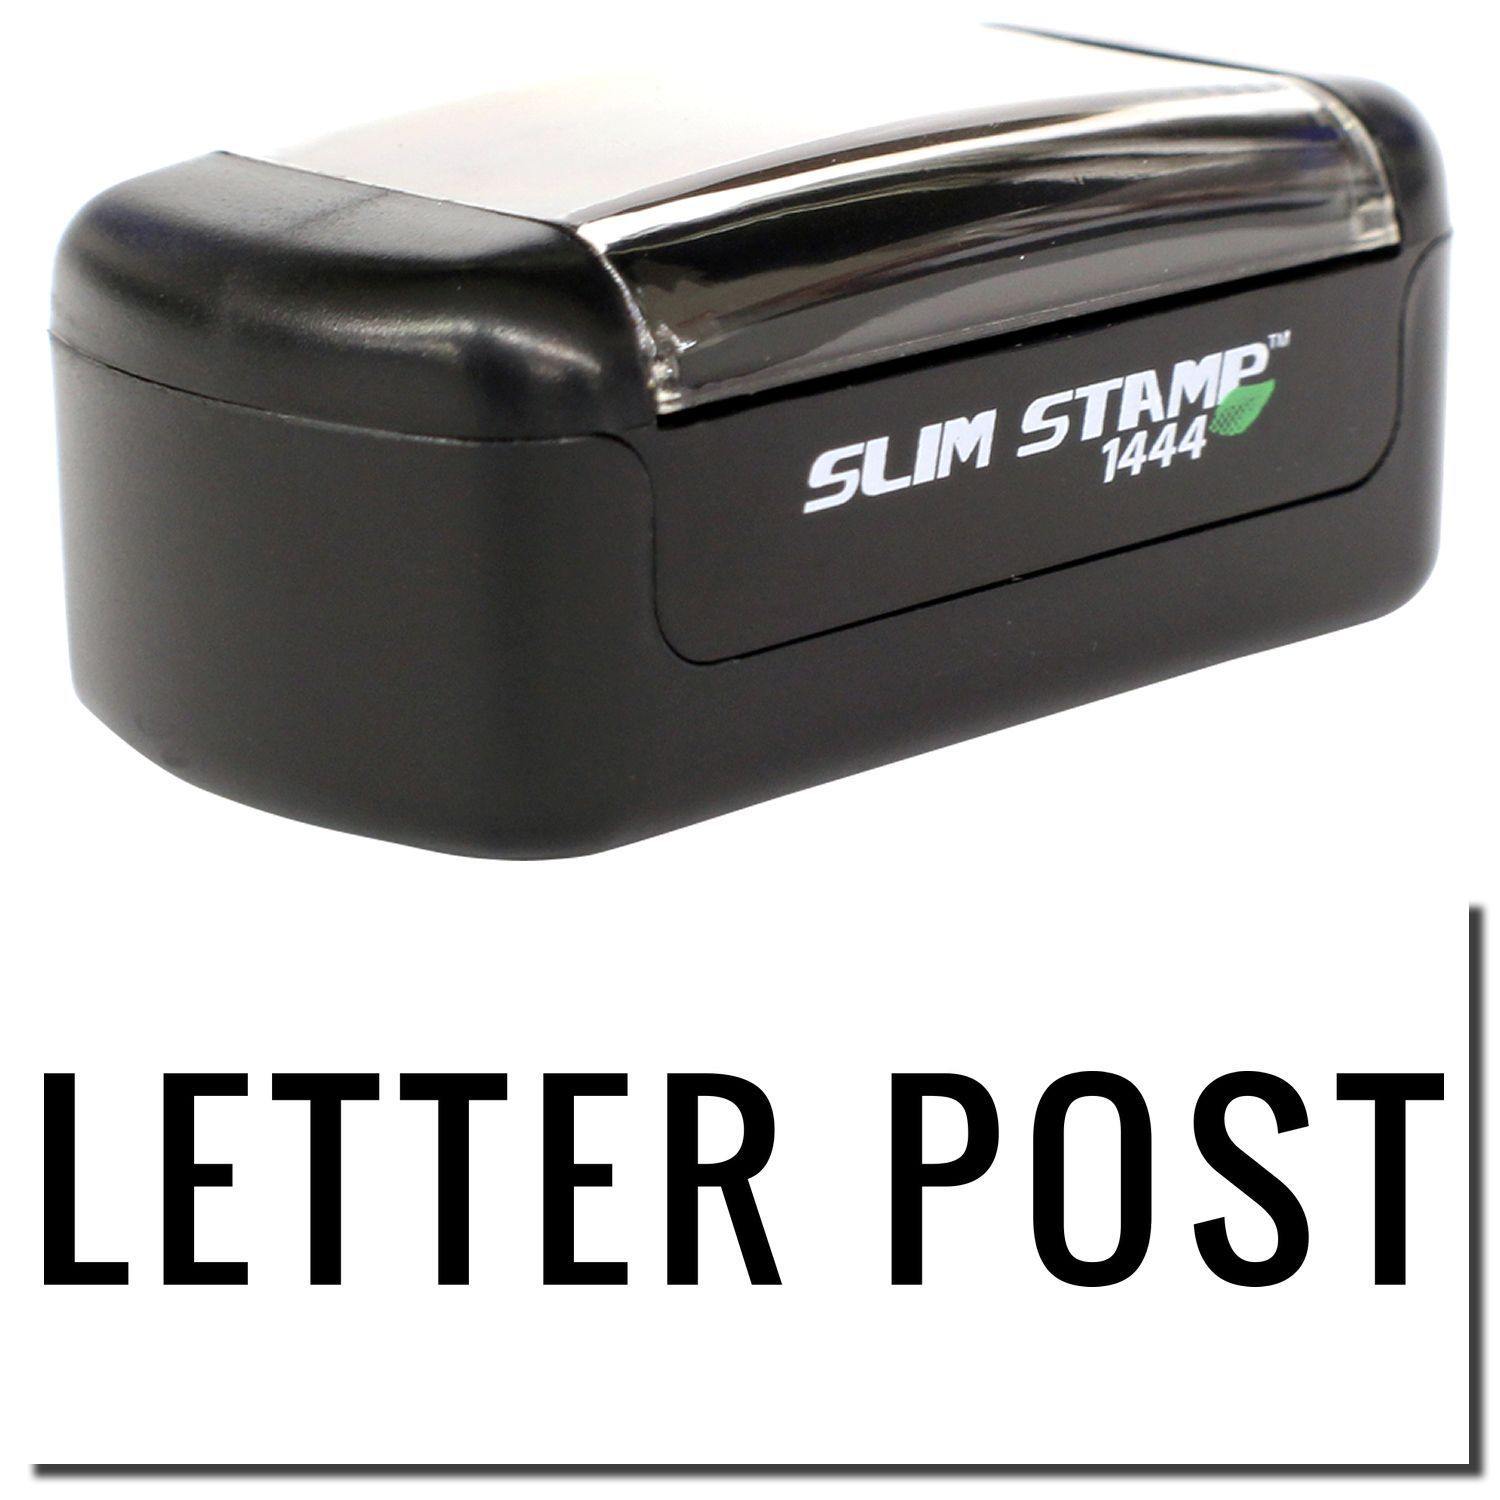 A stock office pre-inked stamp with a stamped image showing how the text "LETTER POST" is displayed after stamping.